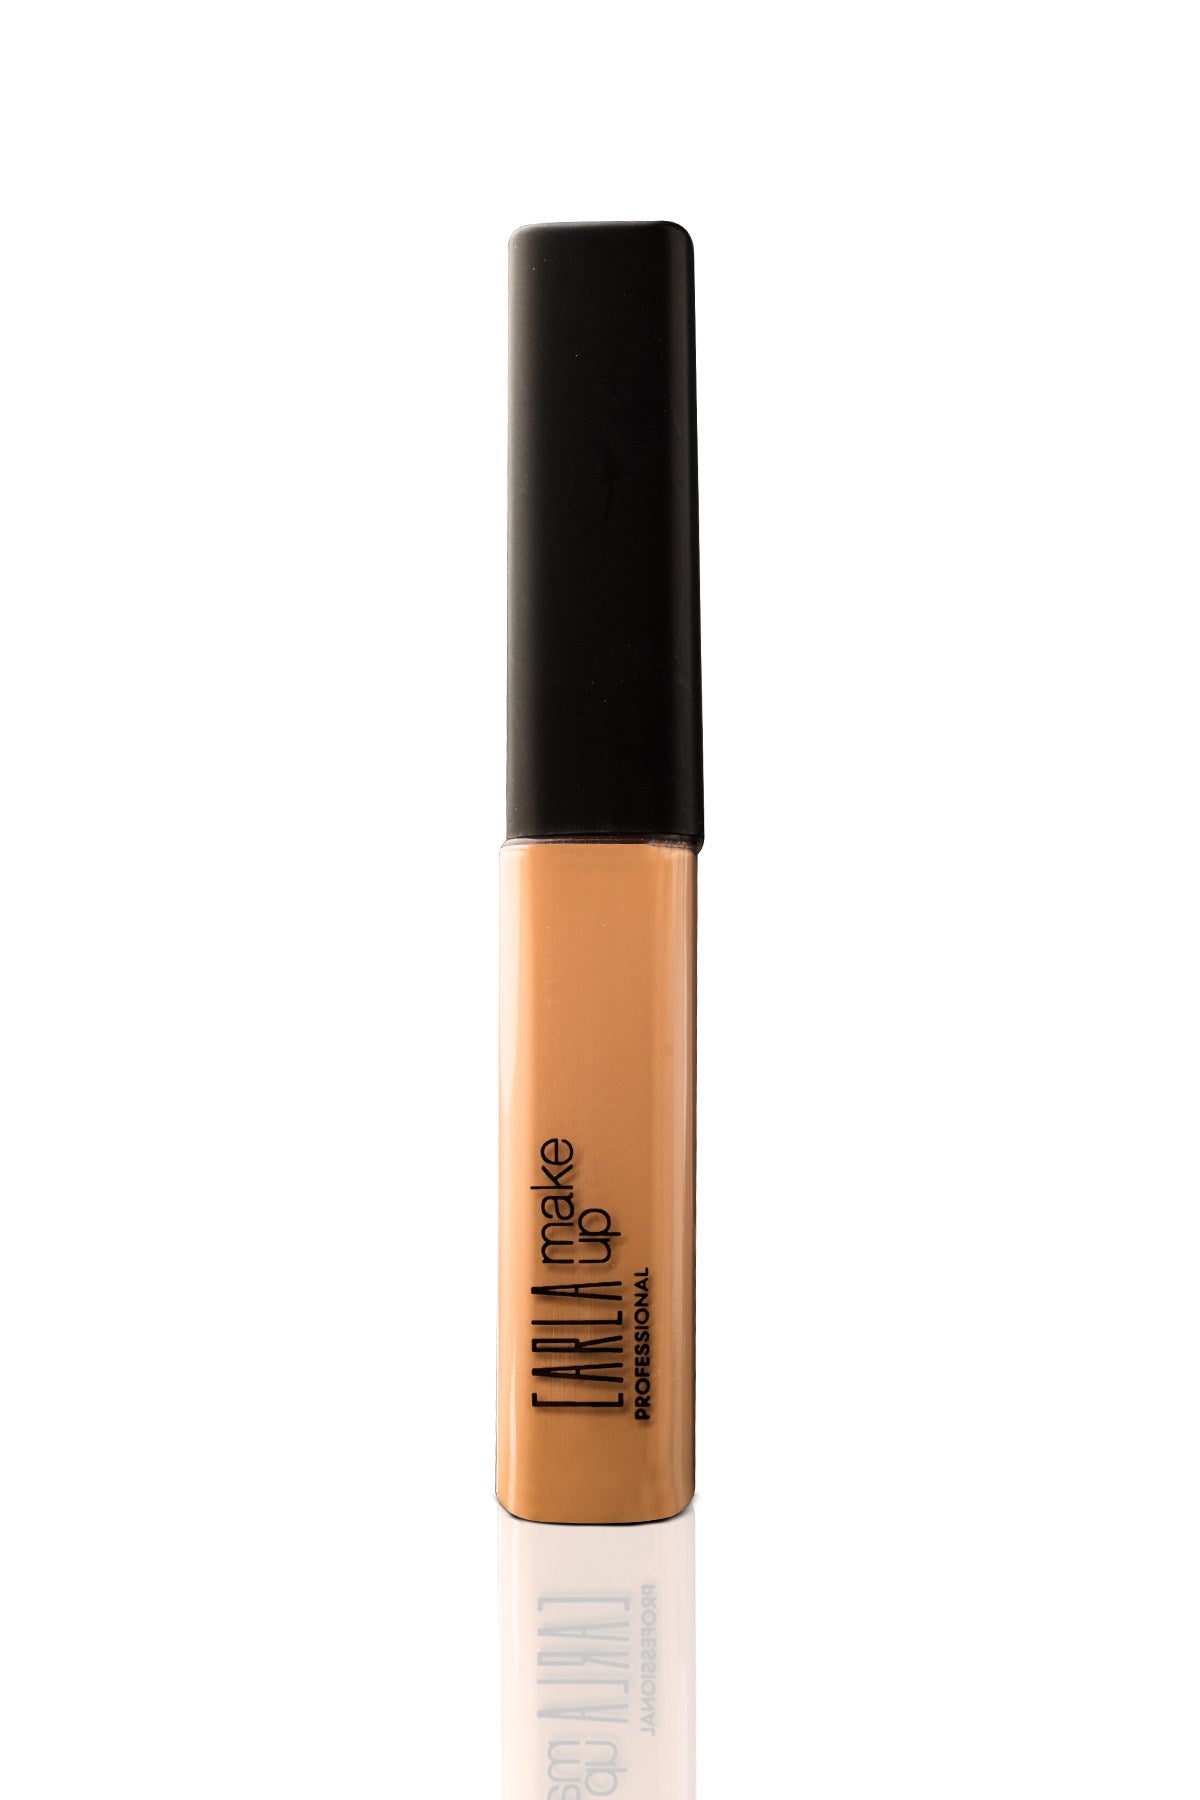 Carla Liquid Matte Concealer - Shade: Medium 402 - Flawless Coverage for a Perfect Look